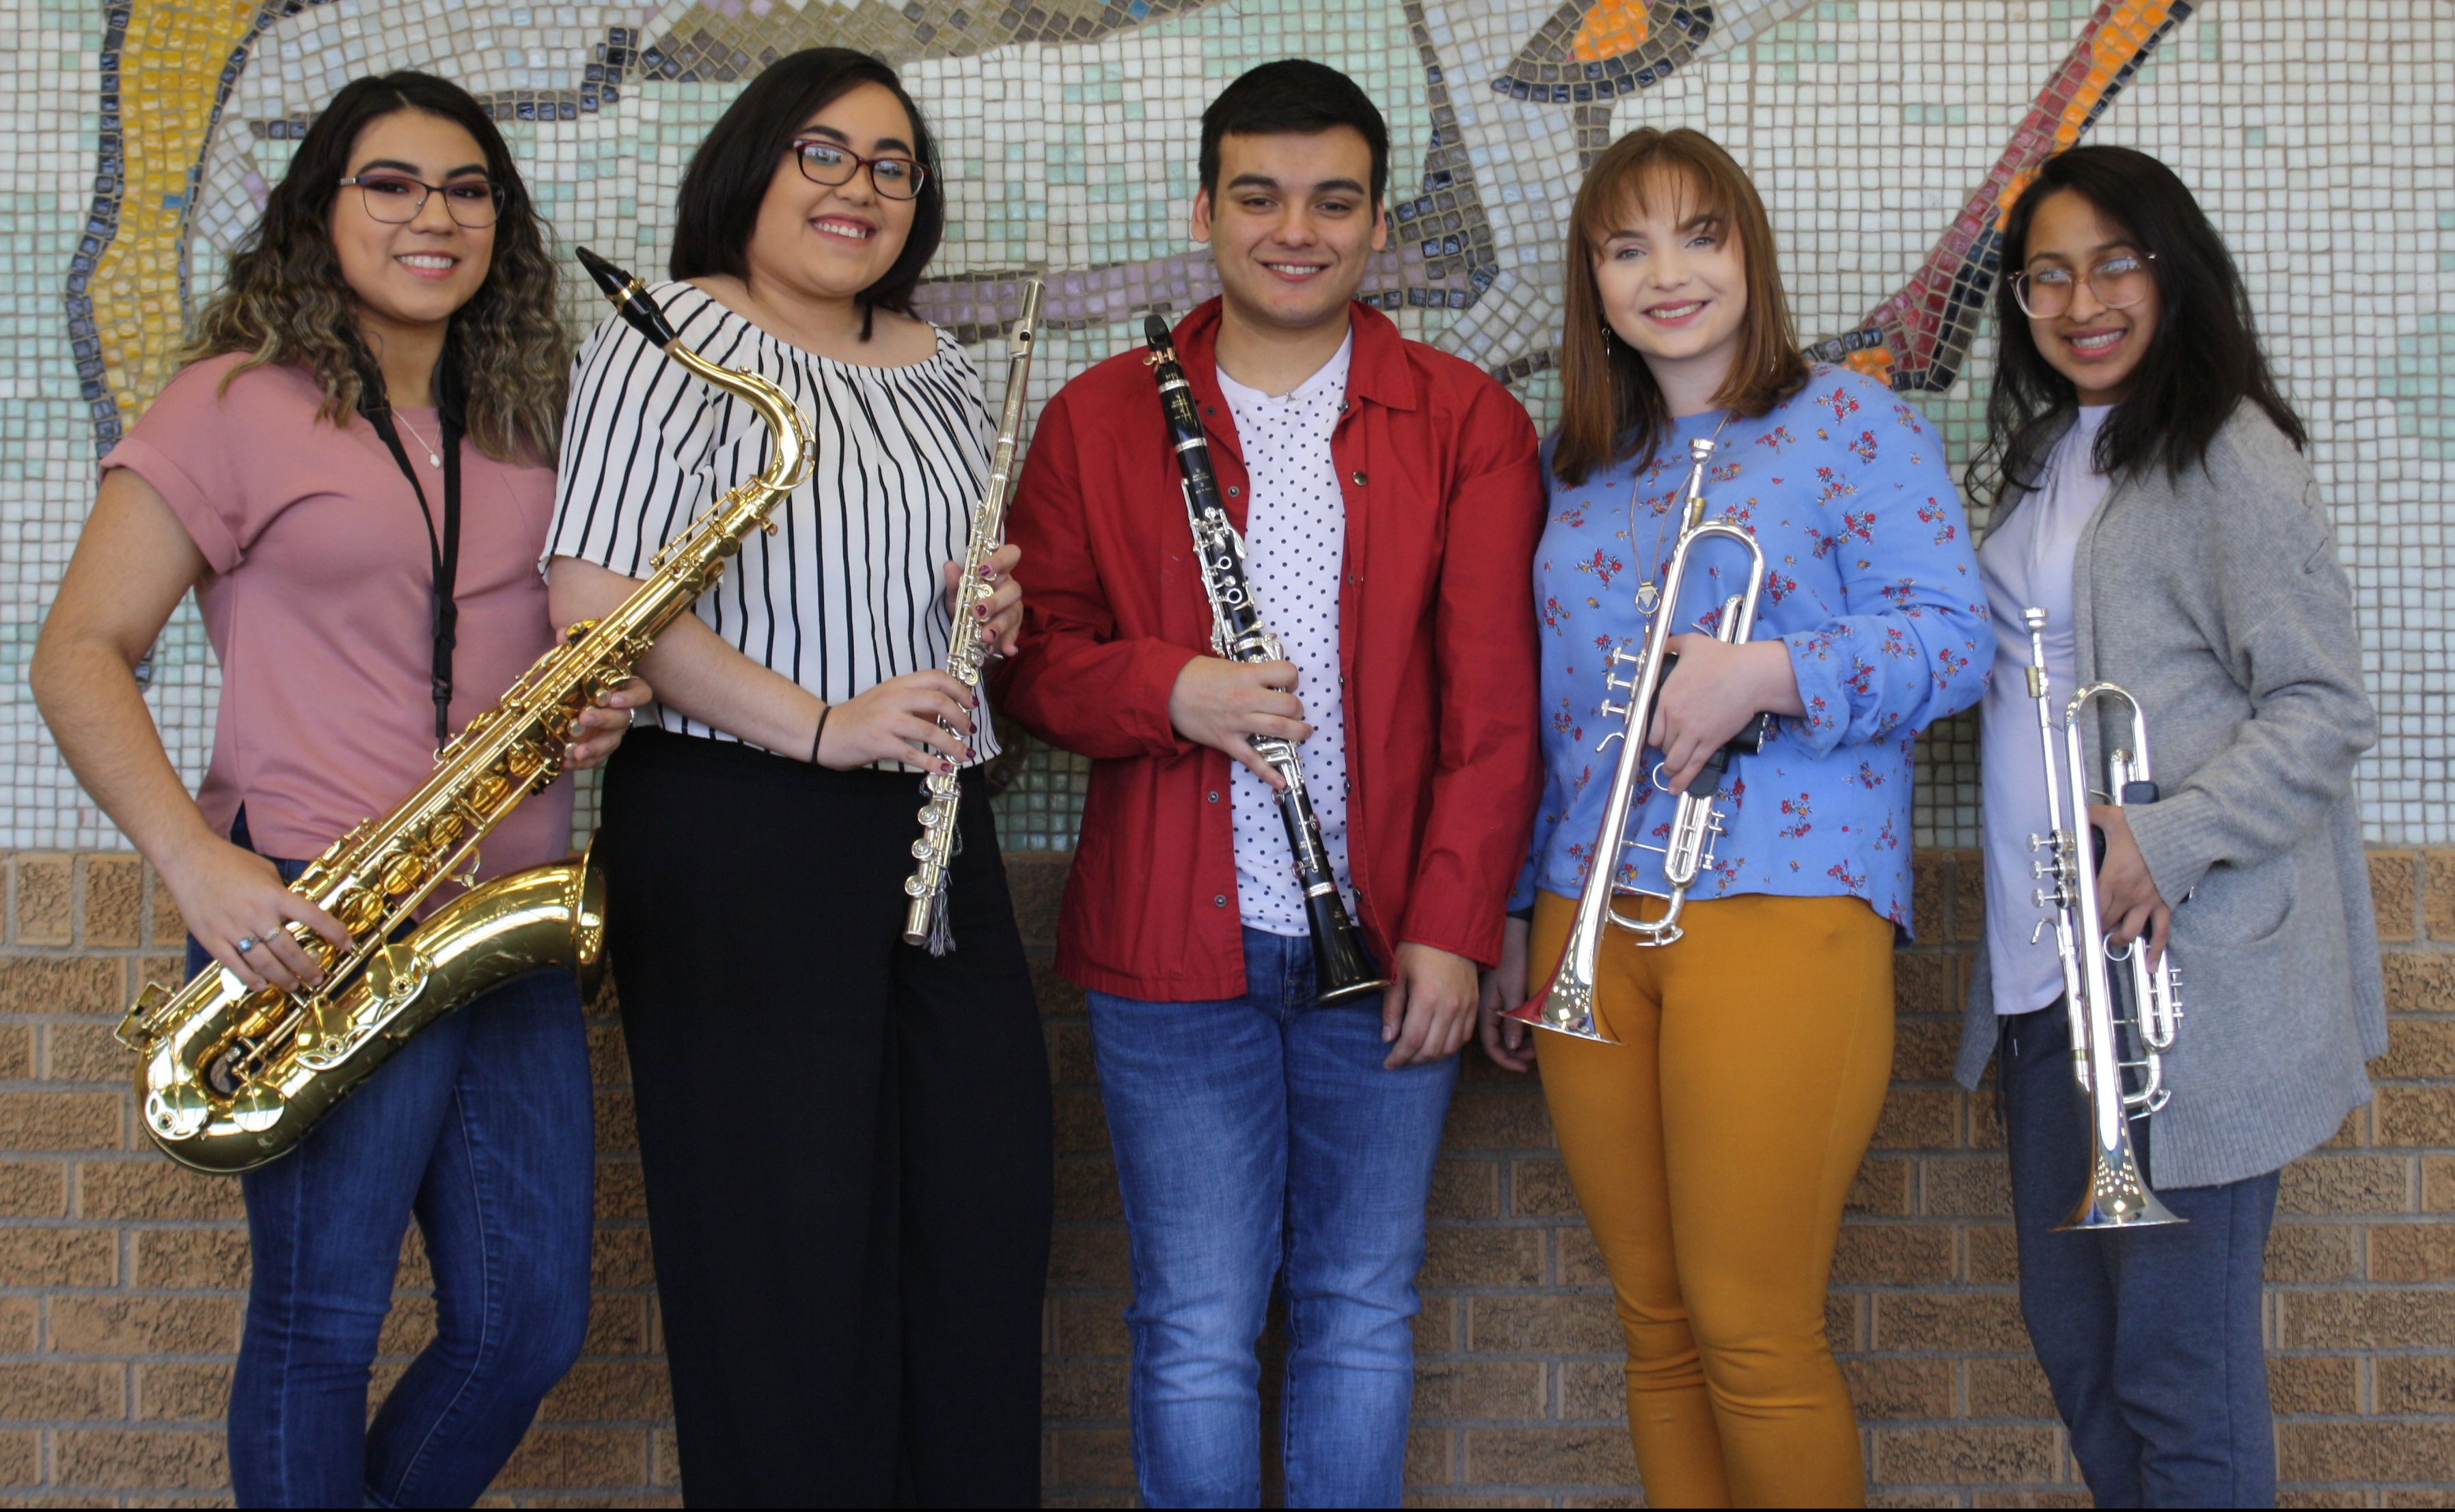 Student musicians selected for All-State Symphonic Band